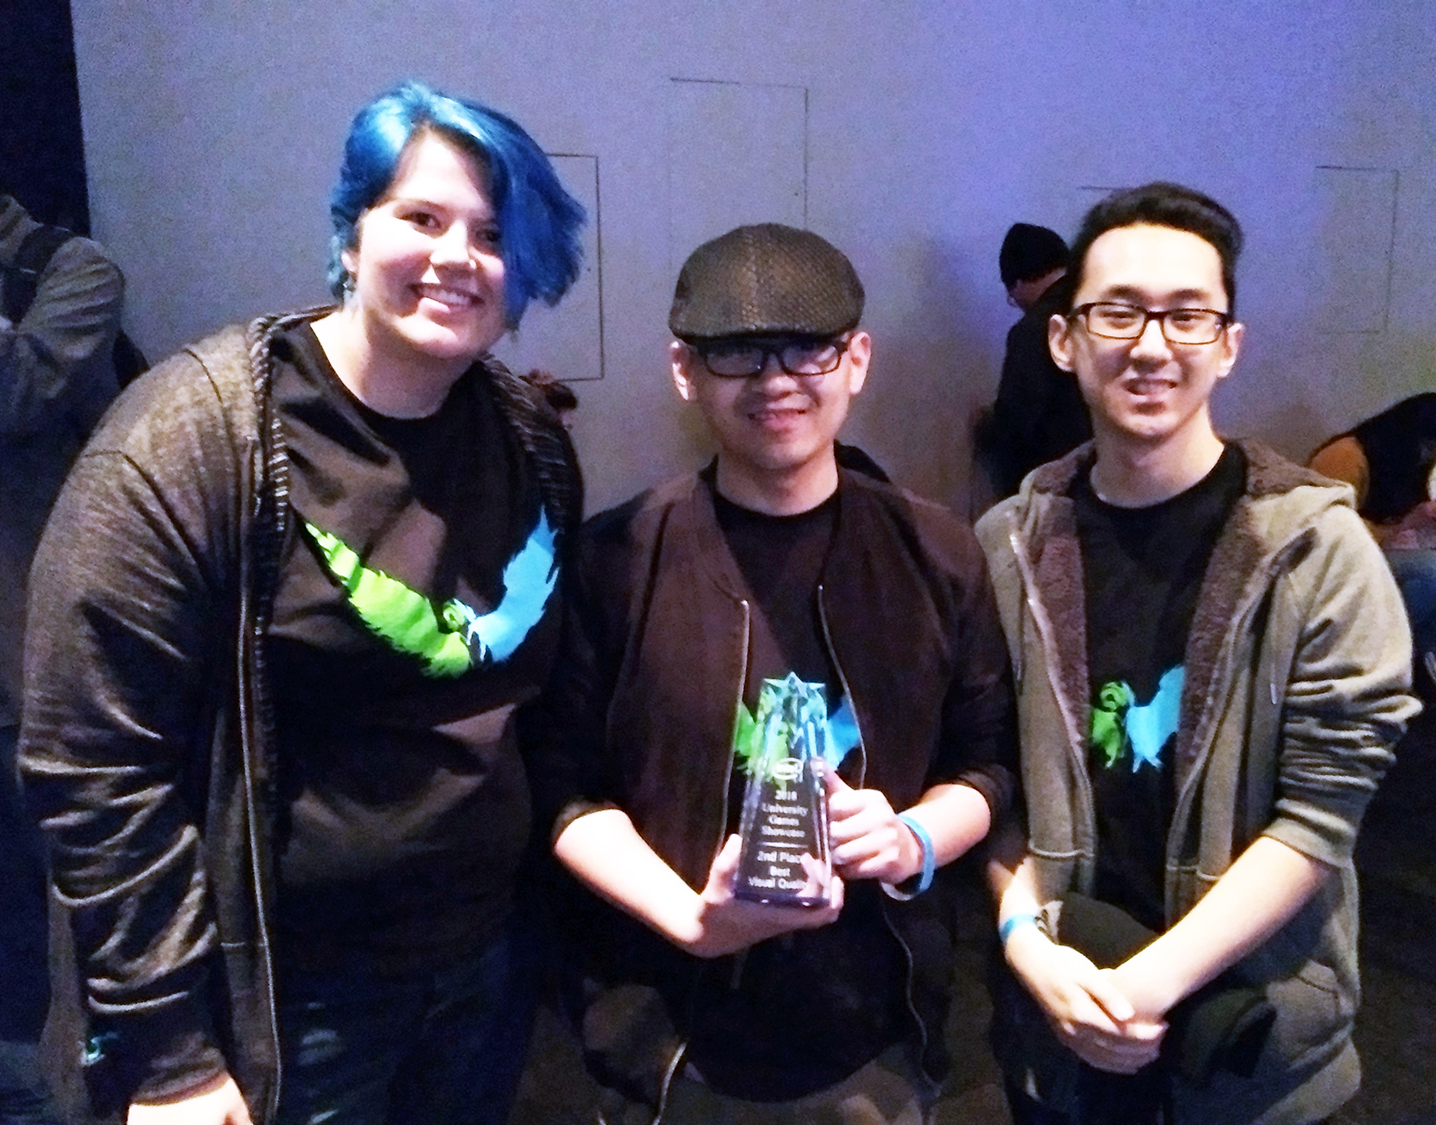 UW-Stout graduate Hue Vang, at center, shows the trophy for second place at the Intel University Game Showcase and Expo in San Francisco, with Kayla Techmeier, a UW-Stout game design-art student, and Vang’s brother, Chuewa Vang, a UW-Stout computer science-game design student who helped with the game.